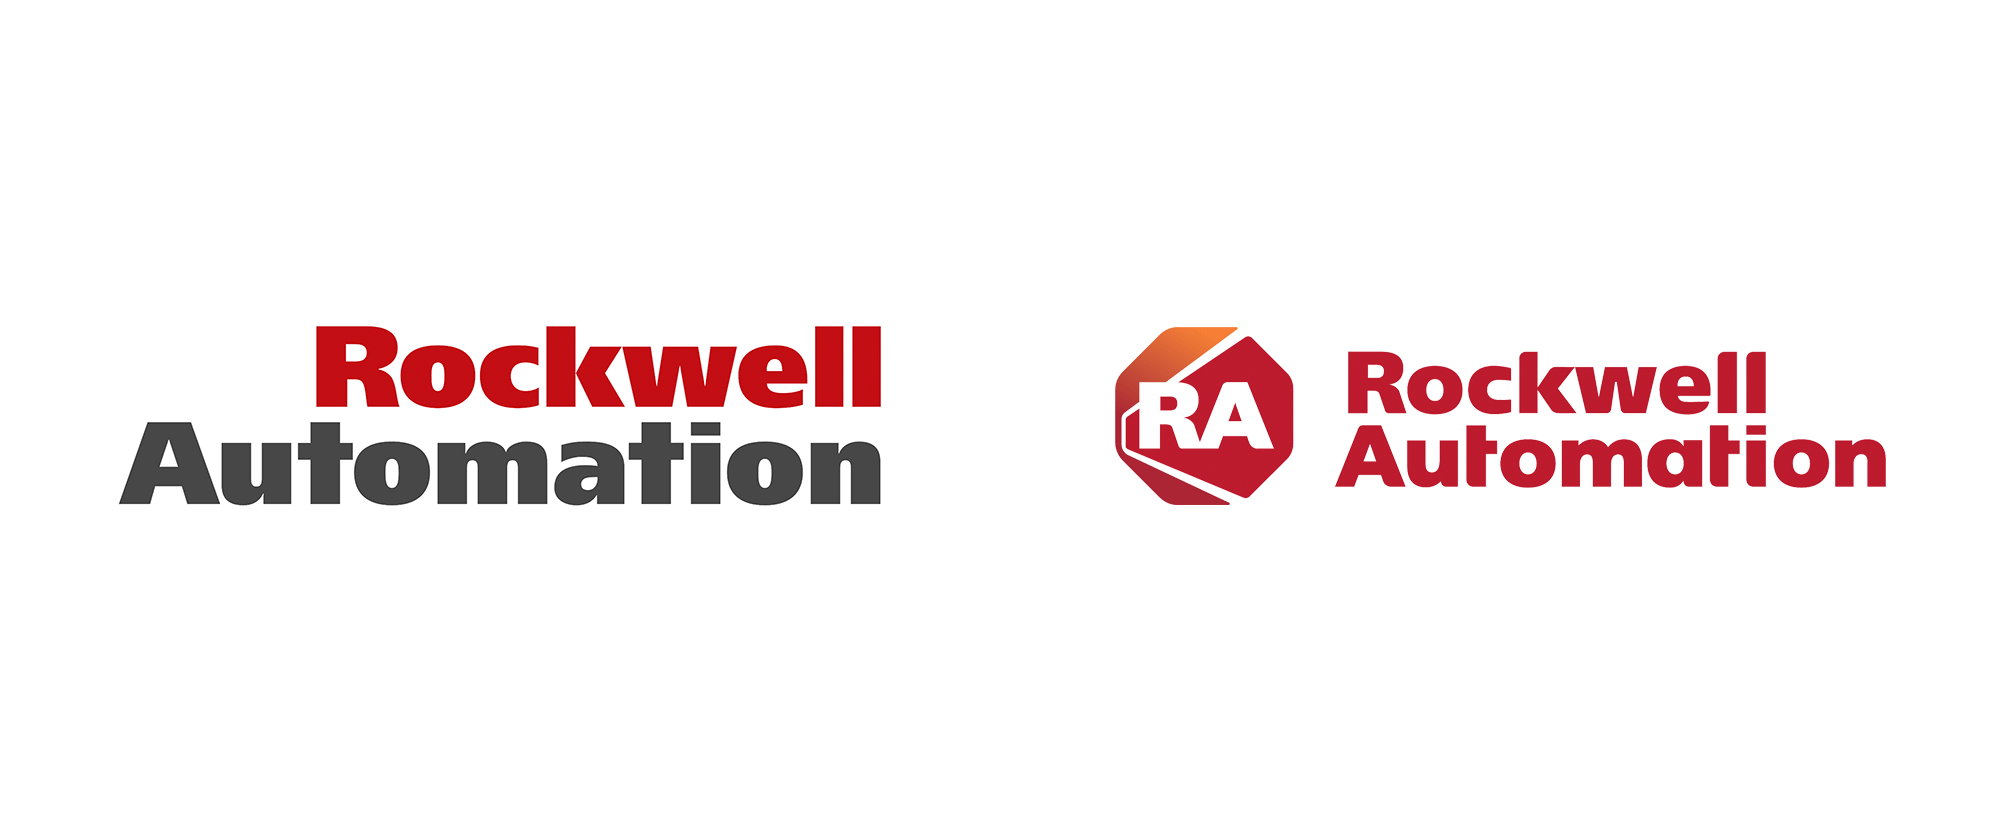 Rockwell Automation Logo - Brand New: New Logo for Rockwell Automation